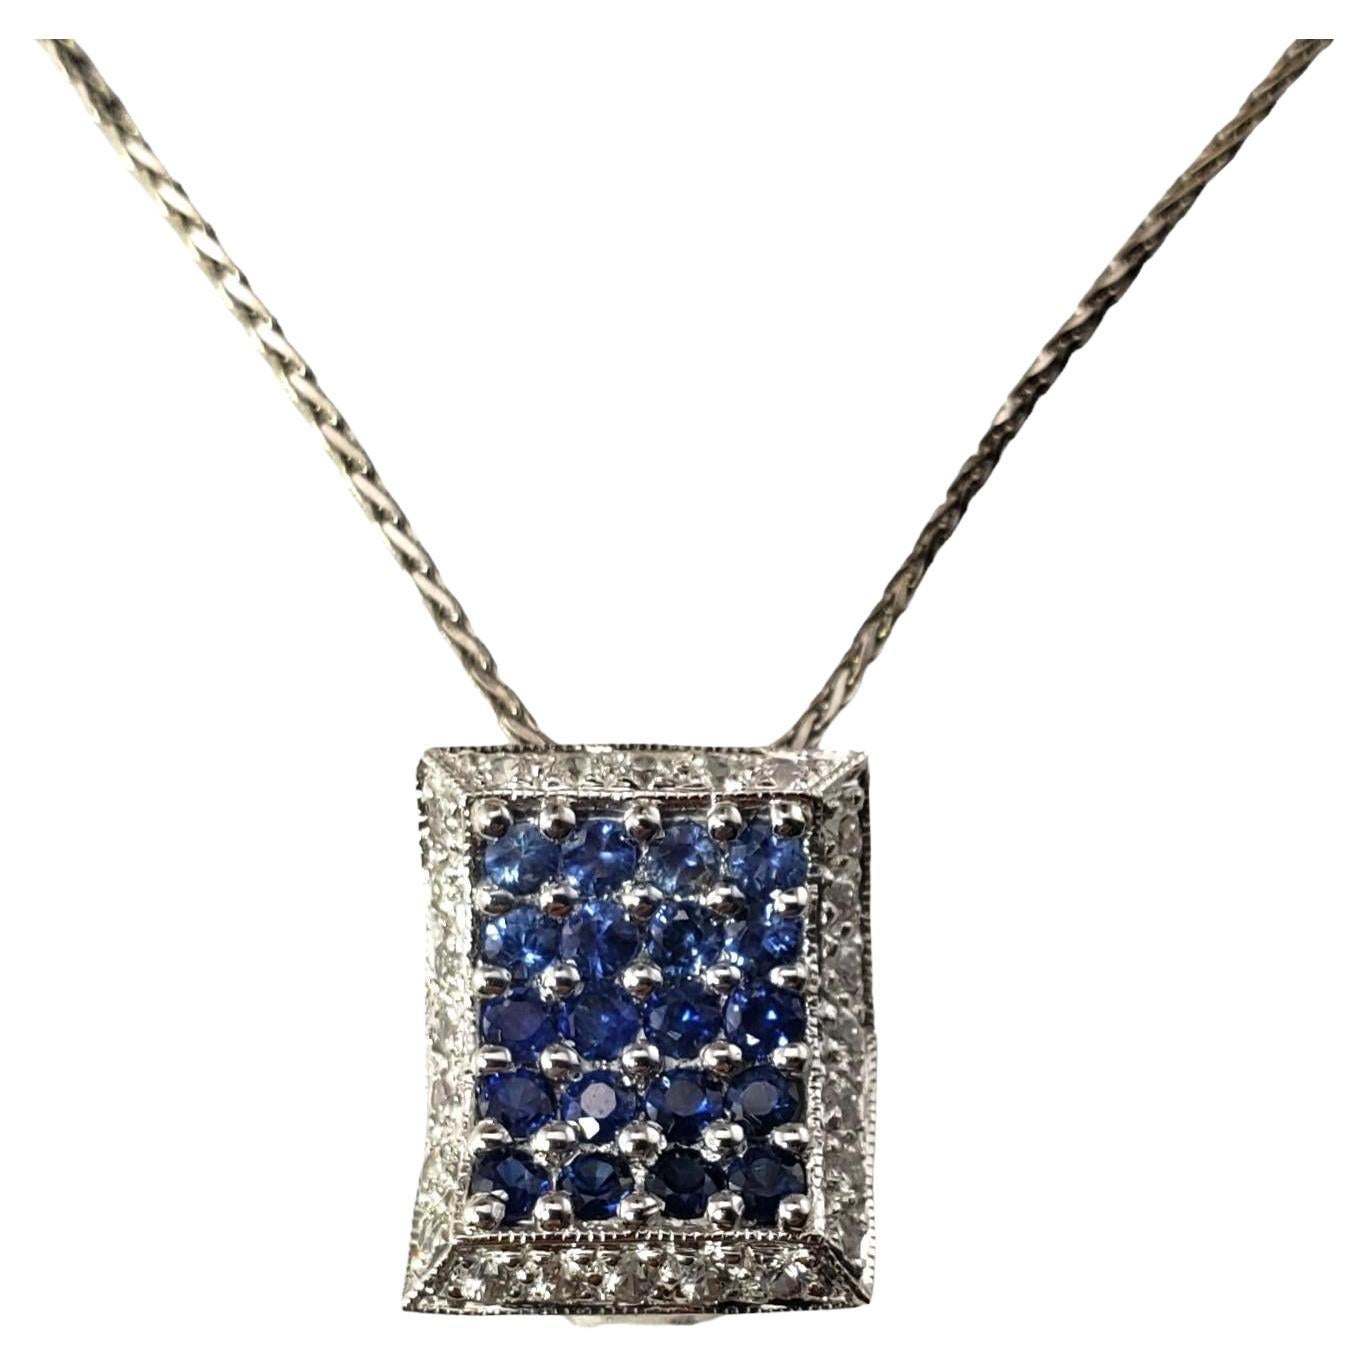  14K WG Blue and White Sapphire Pendant Necklace #15573 For Sale